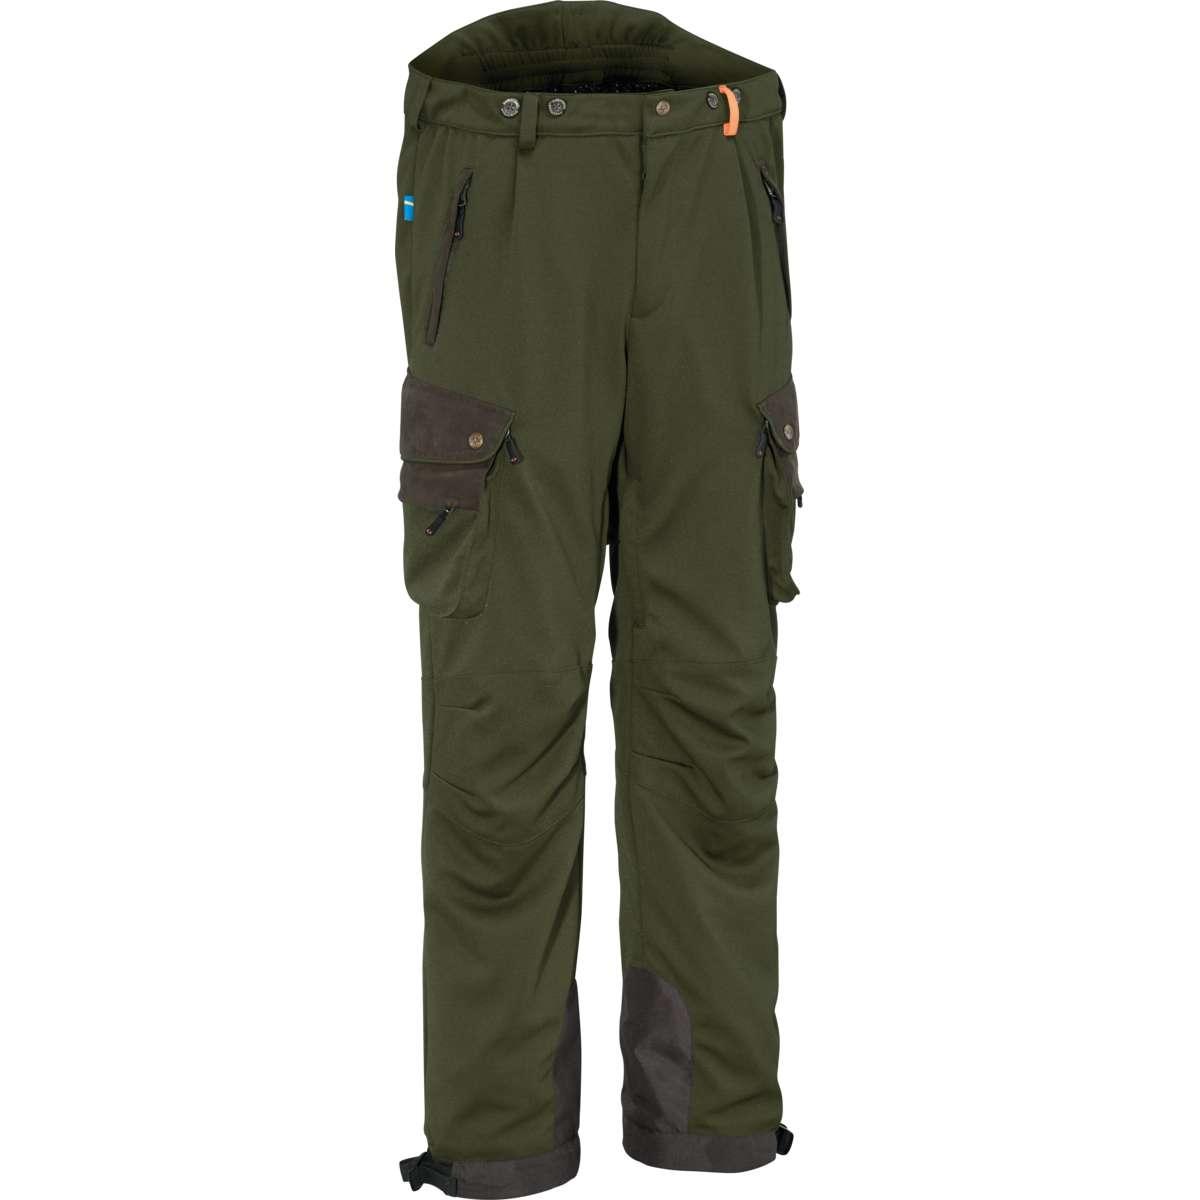 SwedTeam Crest Thermo Classic Trousers Pants Tactical Clothing | eBay